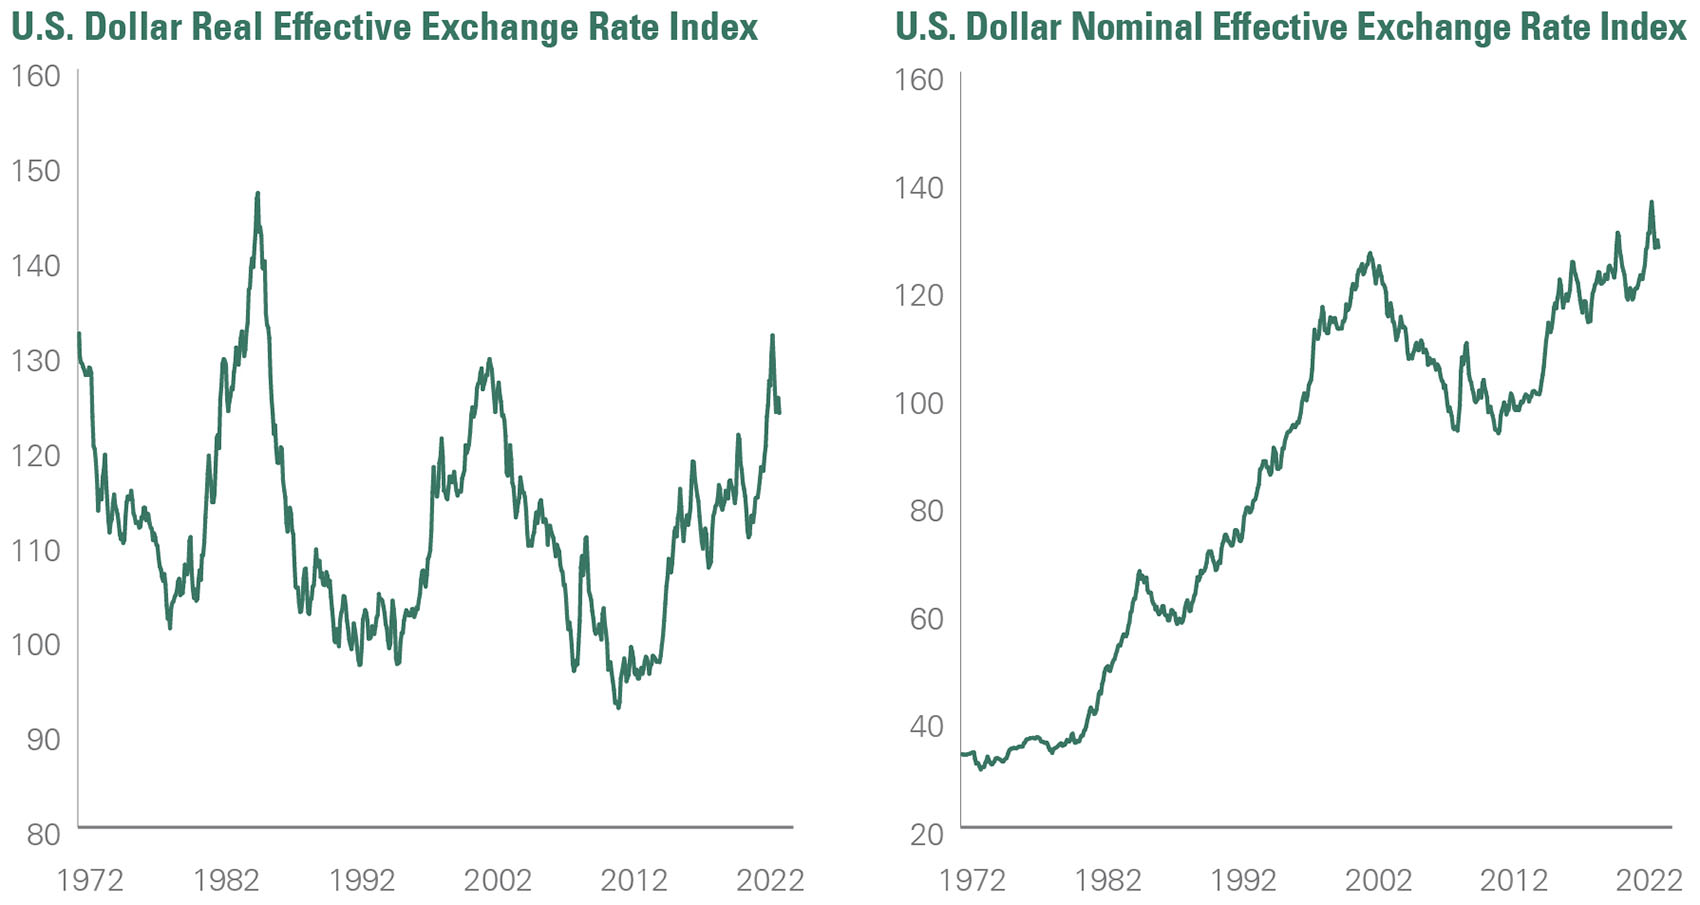 In real terms, the dollar has reached its highest level since 1985; in nominal terms, dollar strength has reached levels not seen in years past.